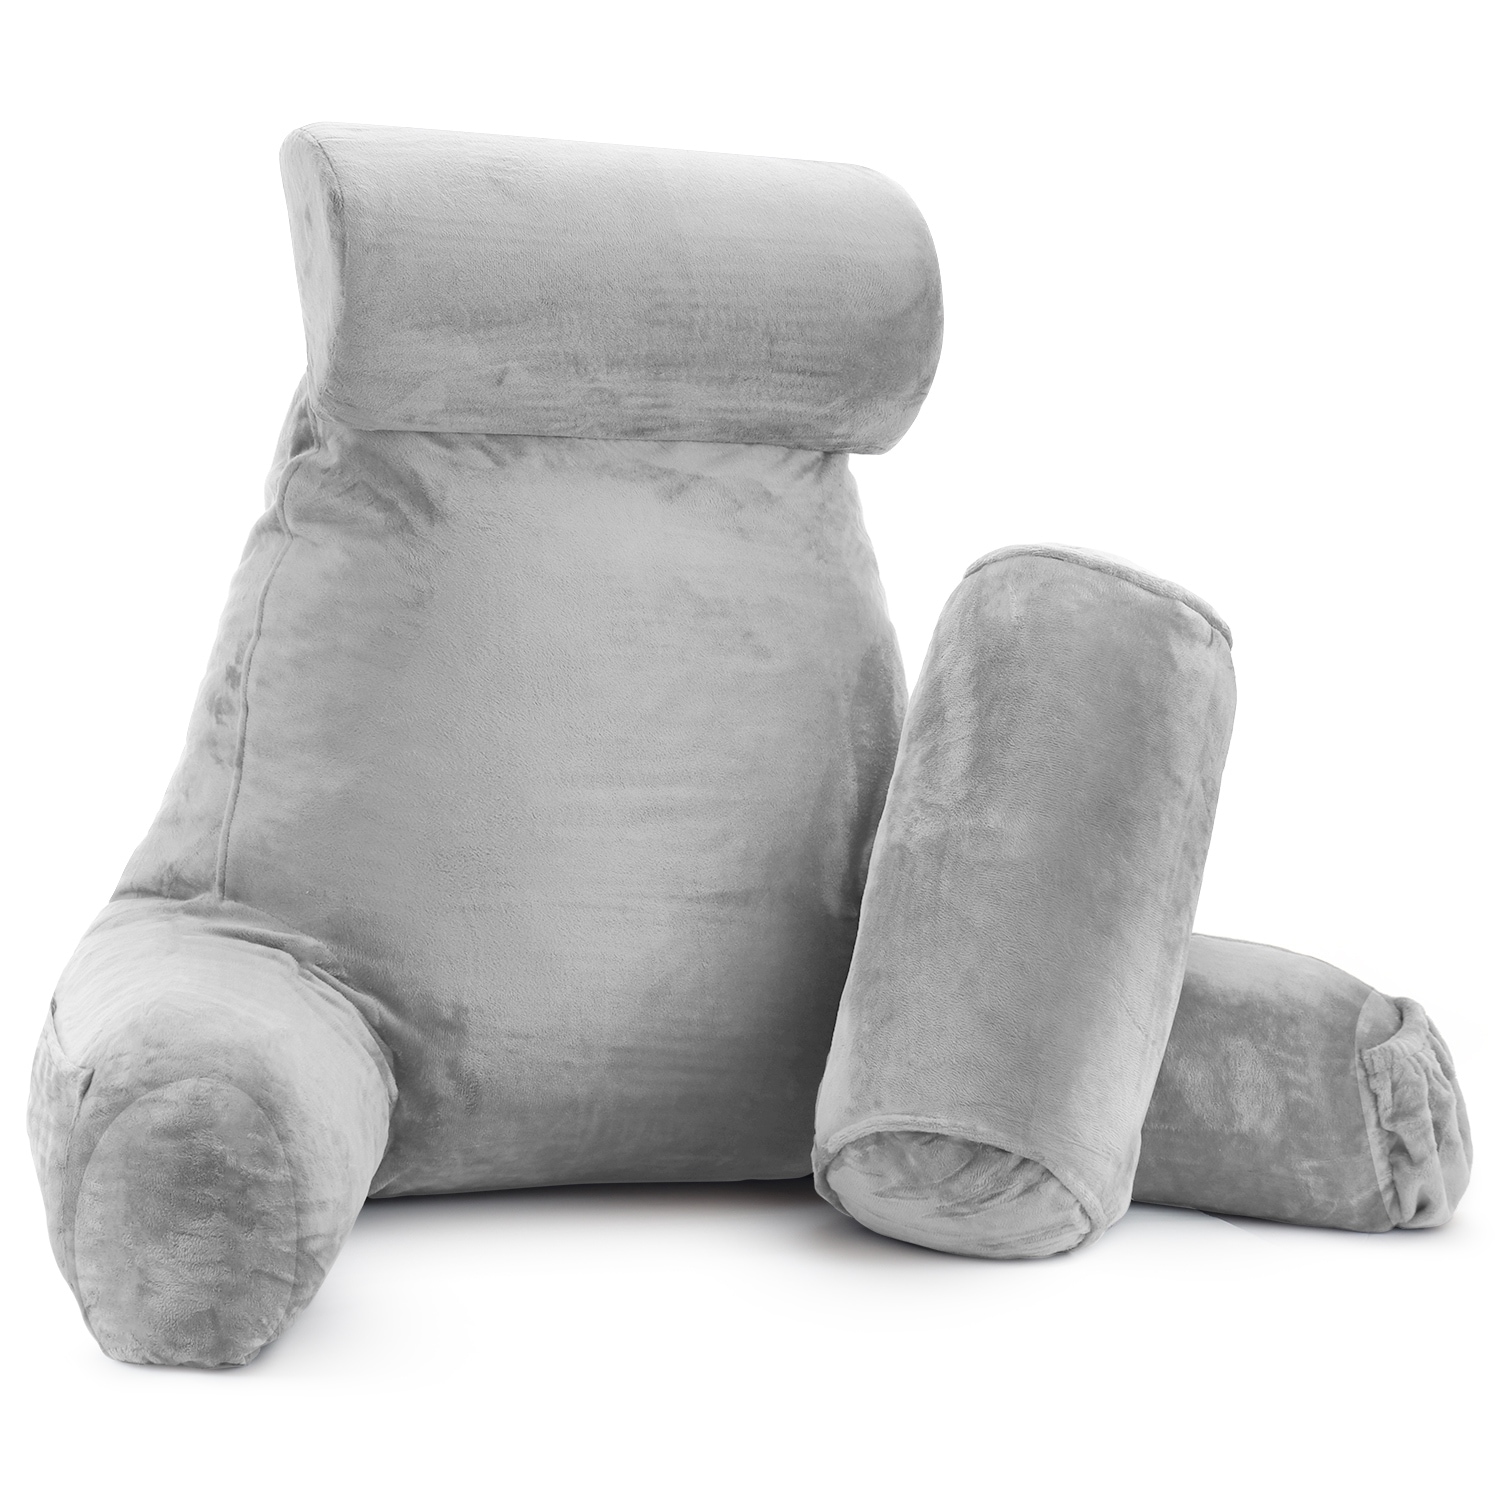 https://ak1.ostkcdn.com/images/products/is/images/direct/69eb0213f03118d7f7d52e5a4a87c86bb4095c66/Nestl-Backrest-Reading-Pillow-with-Arms---Shredded-Memory-Foam-Back-Support-Bed-Rest-Pillow.jpg